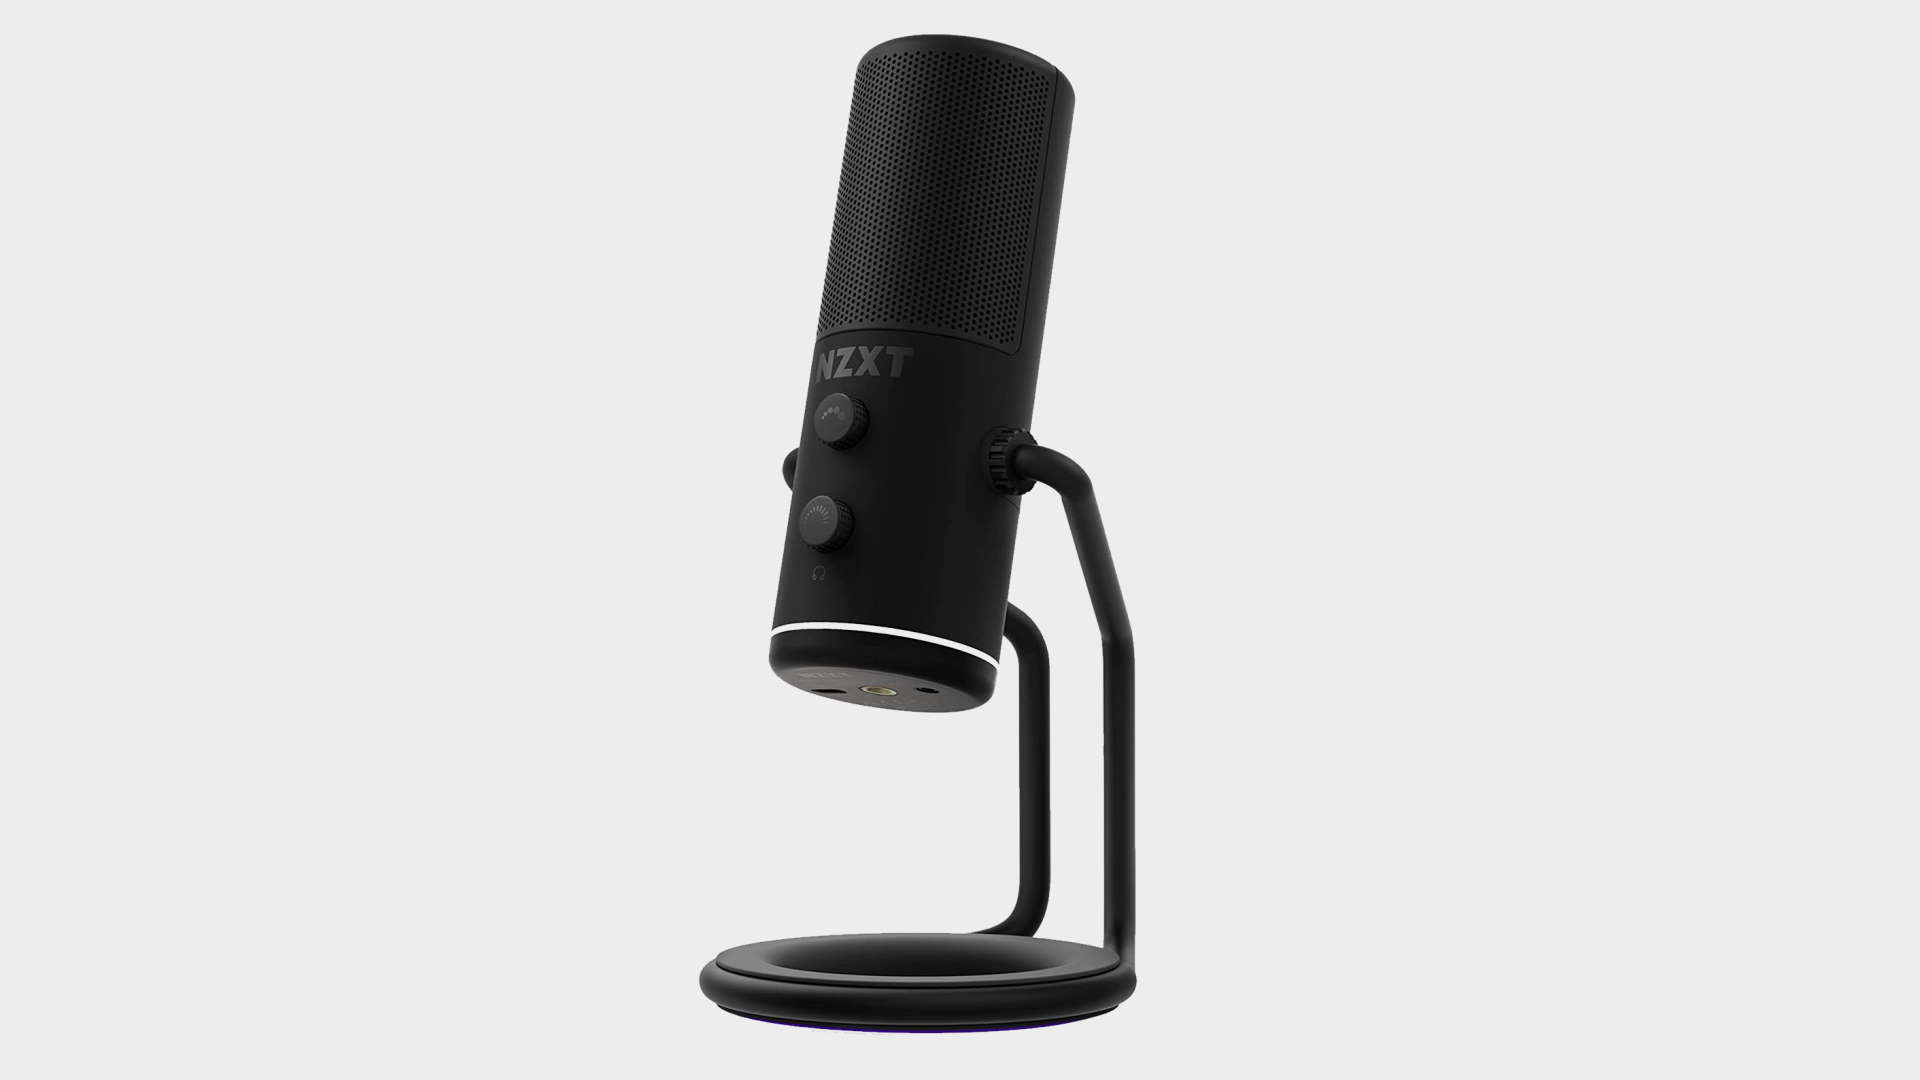  NZXT Capsule USB microphone review 